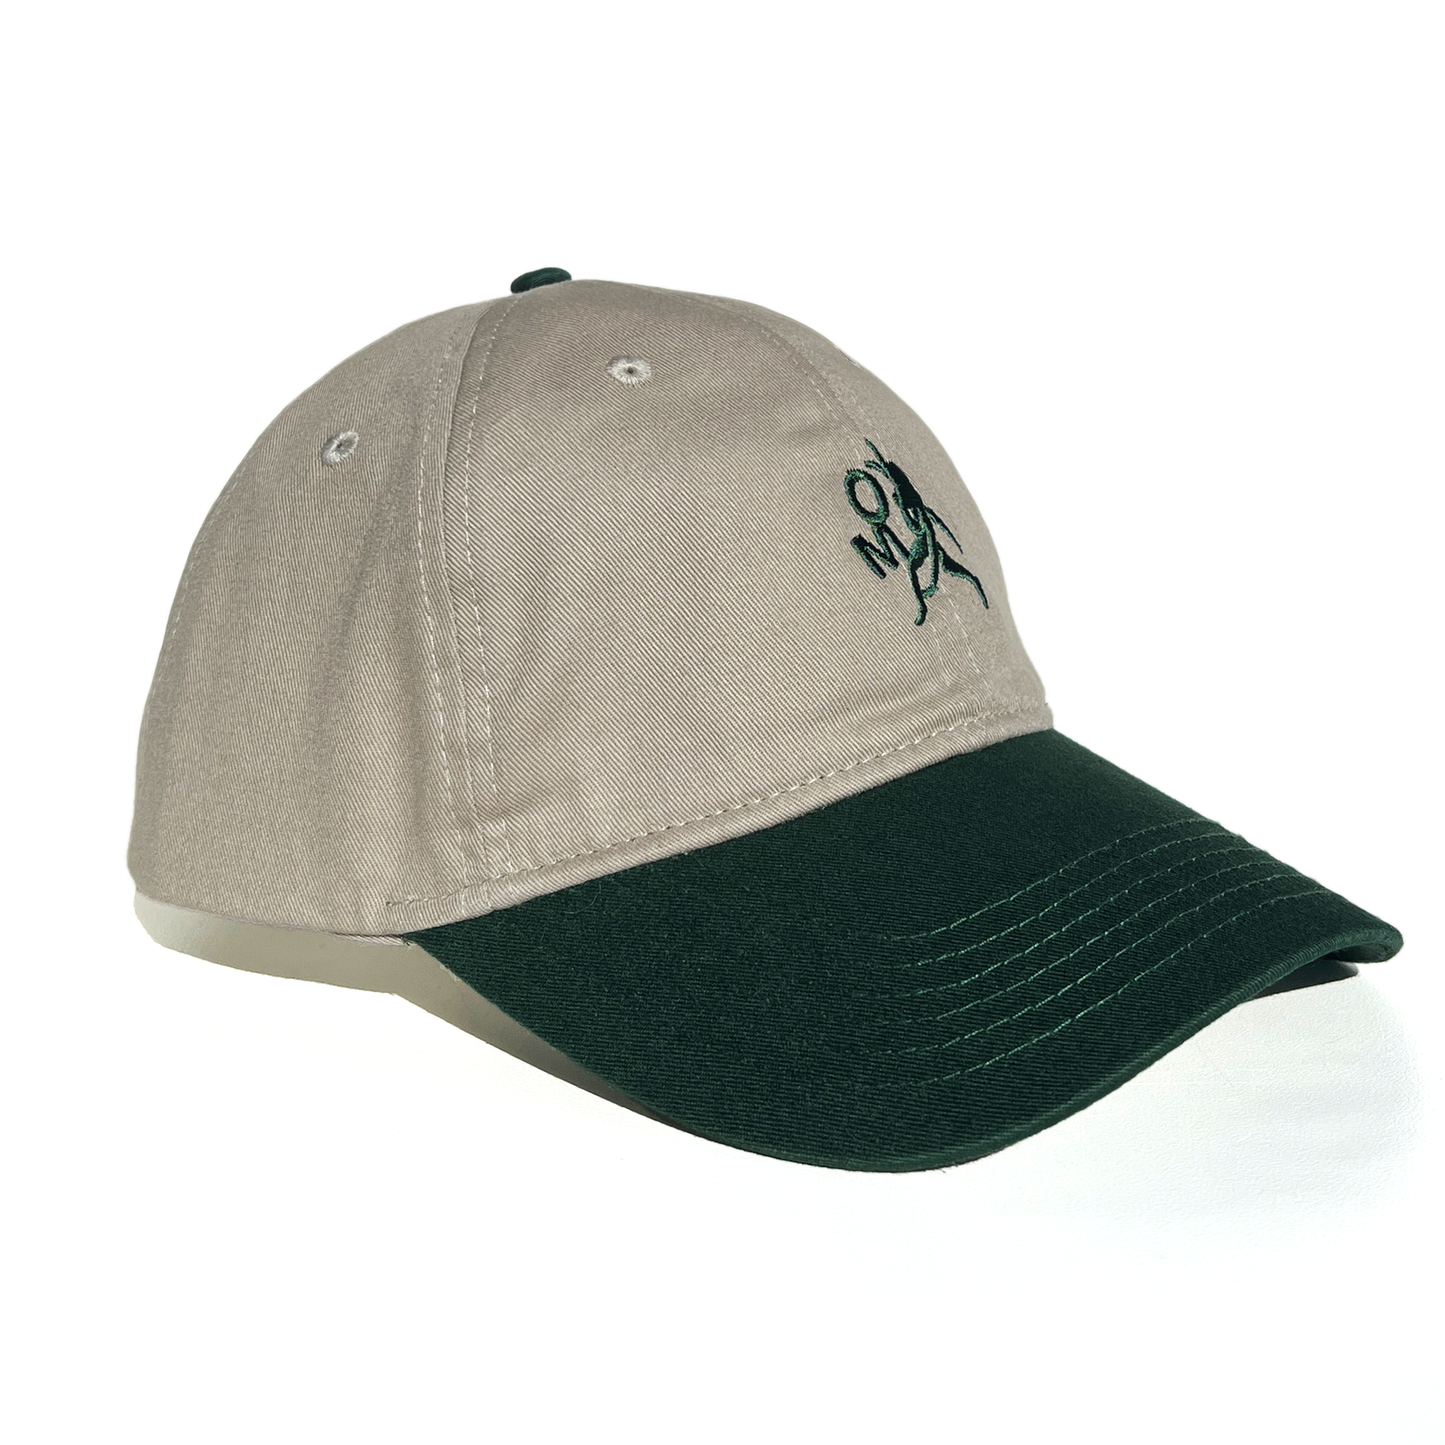 INSTITUTE 6-PANEL : FOREST/EARTHSTONE